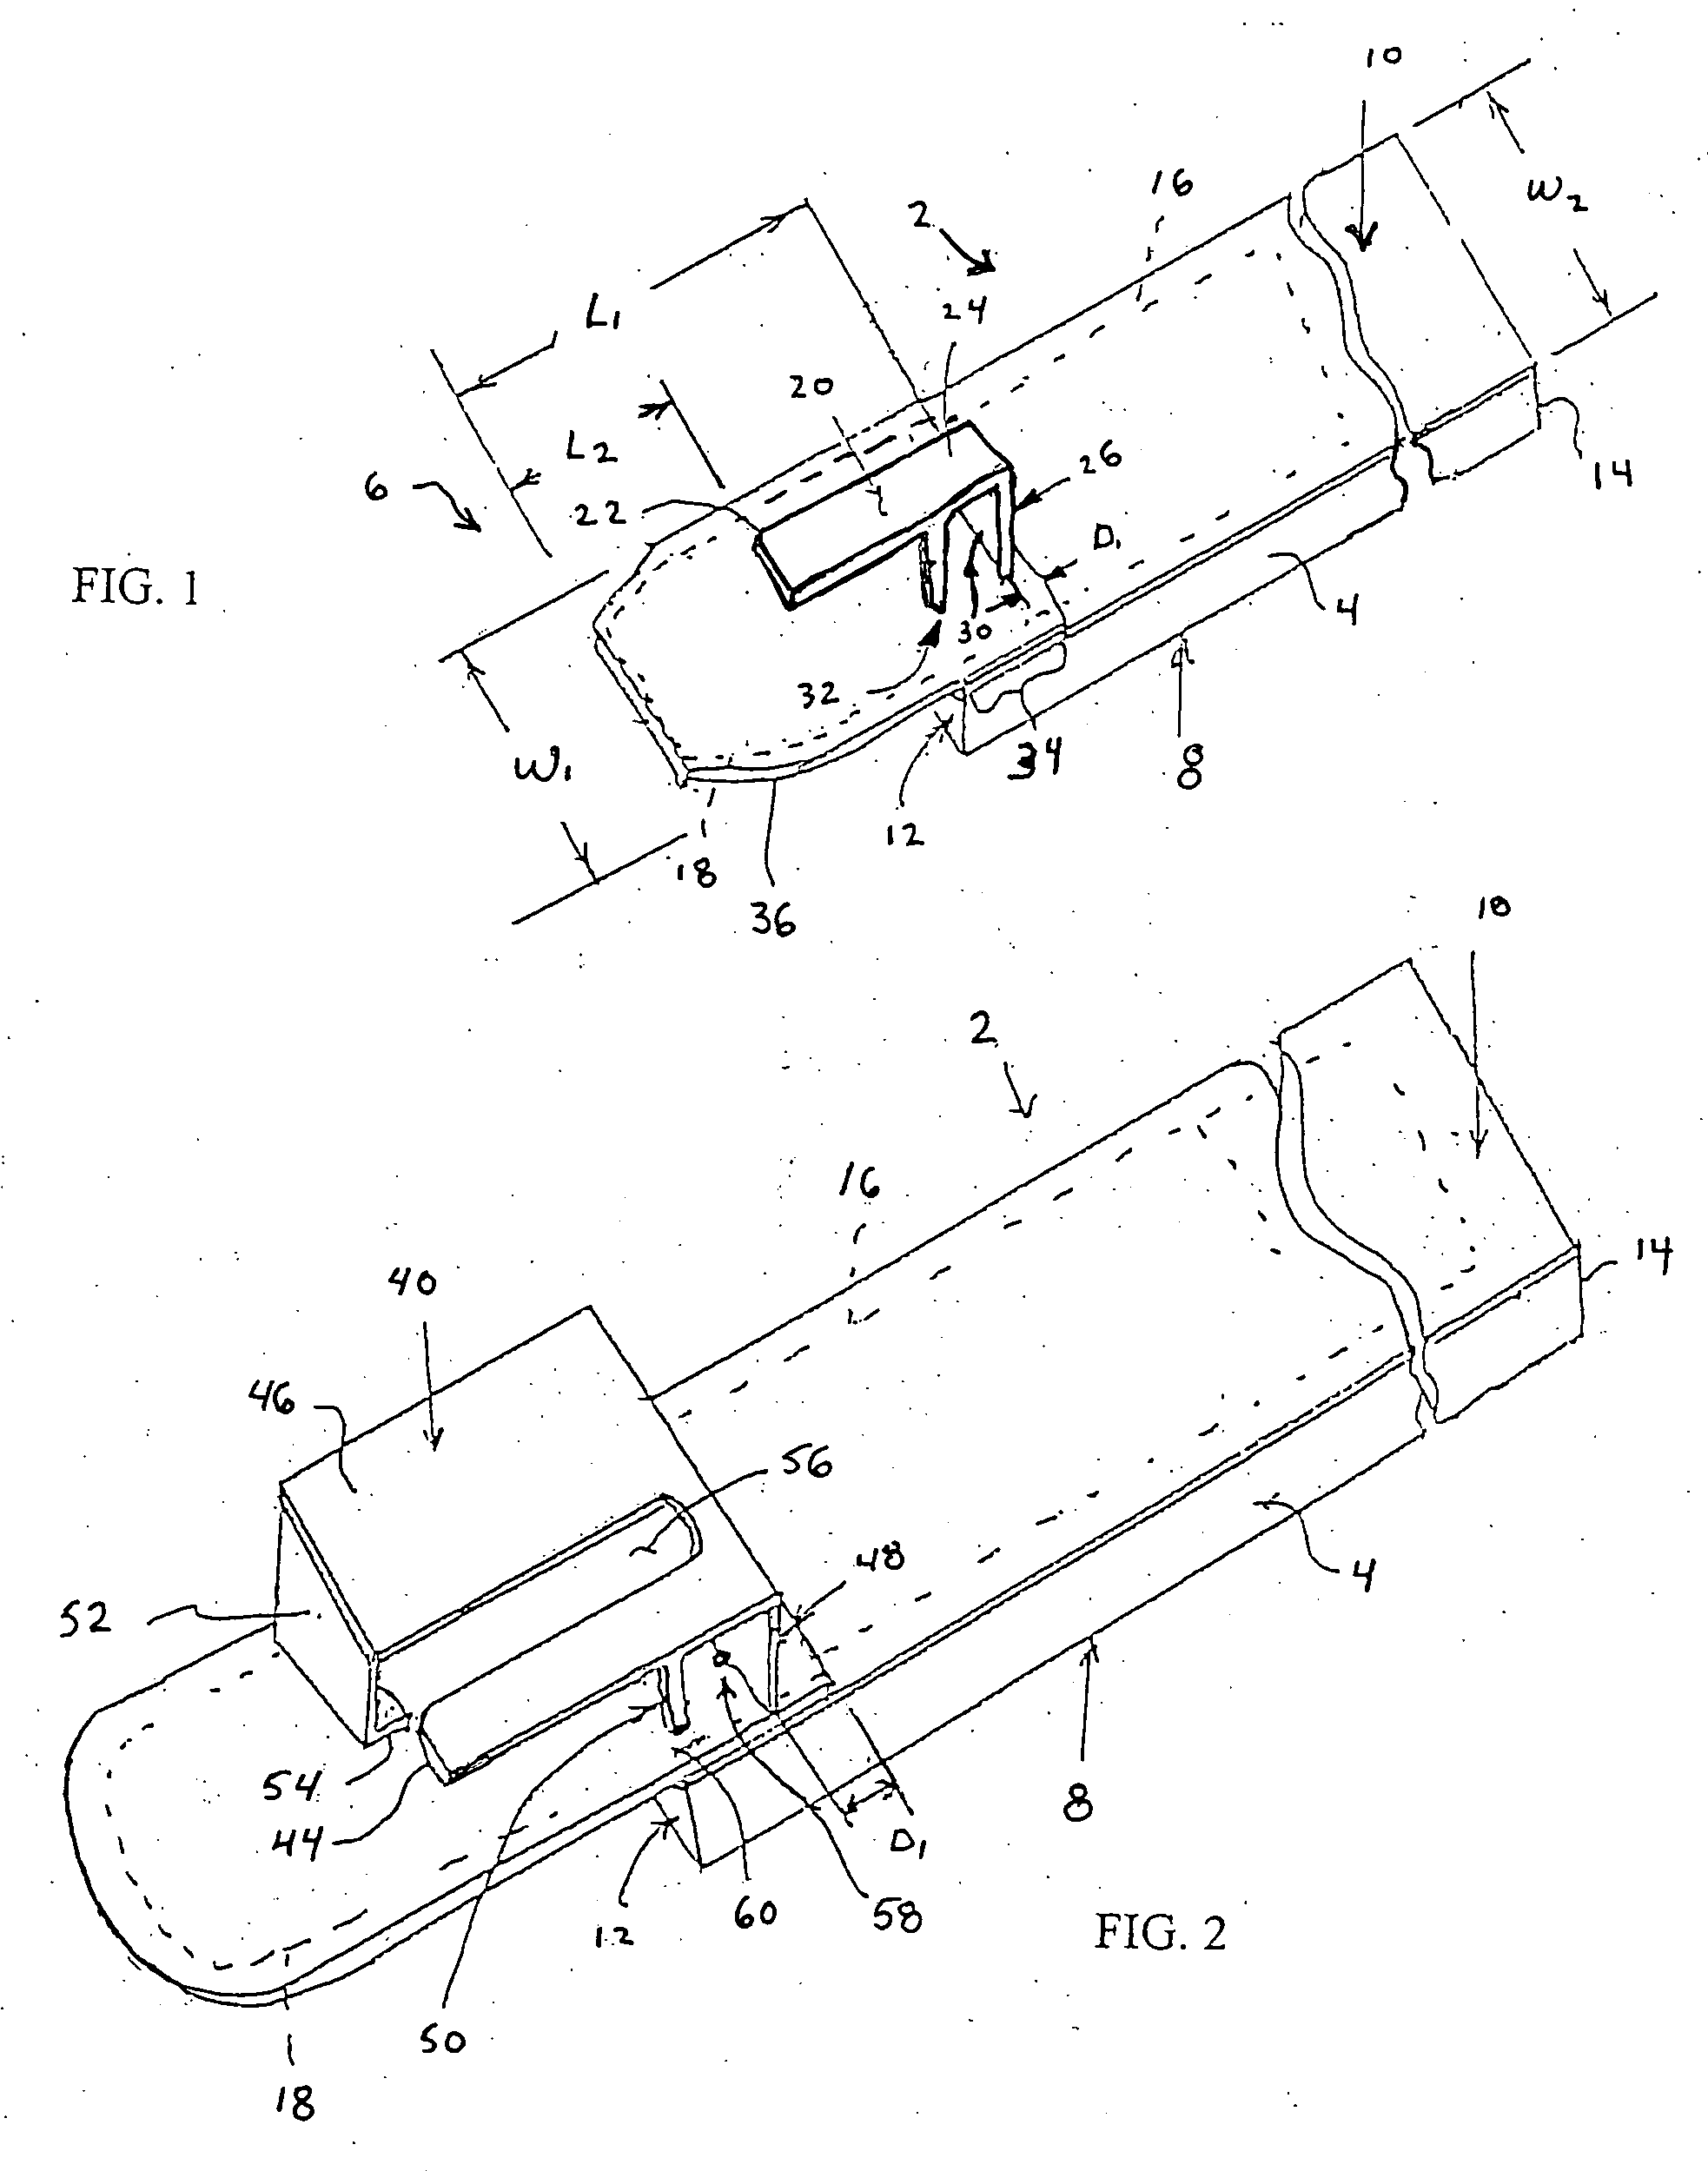 Oriented PIFA-type device and method of use for reducing RF interference